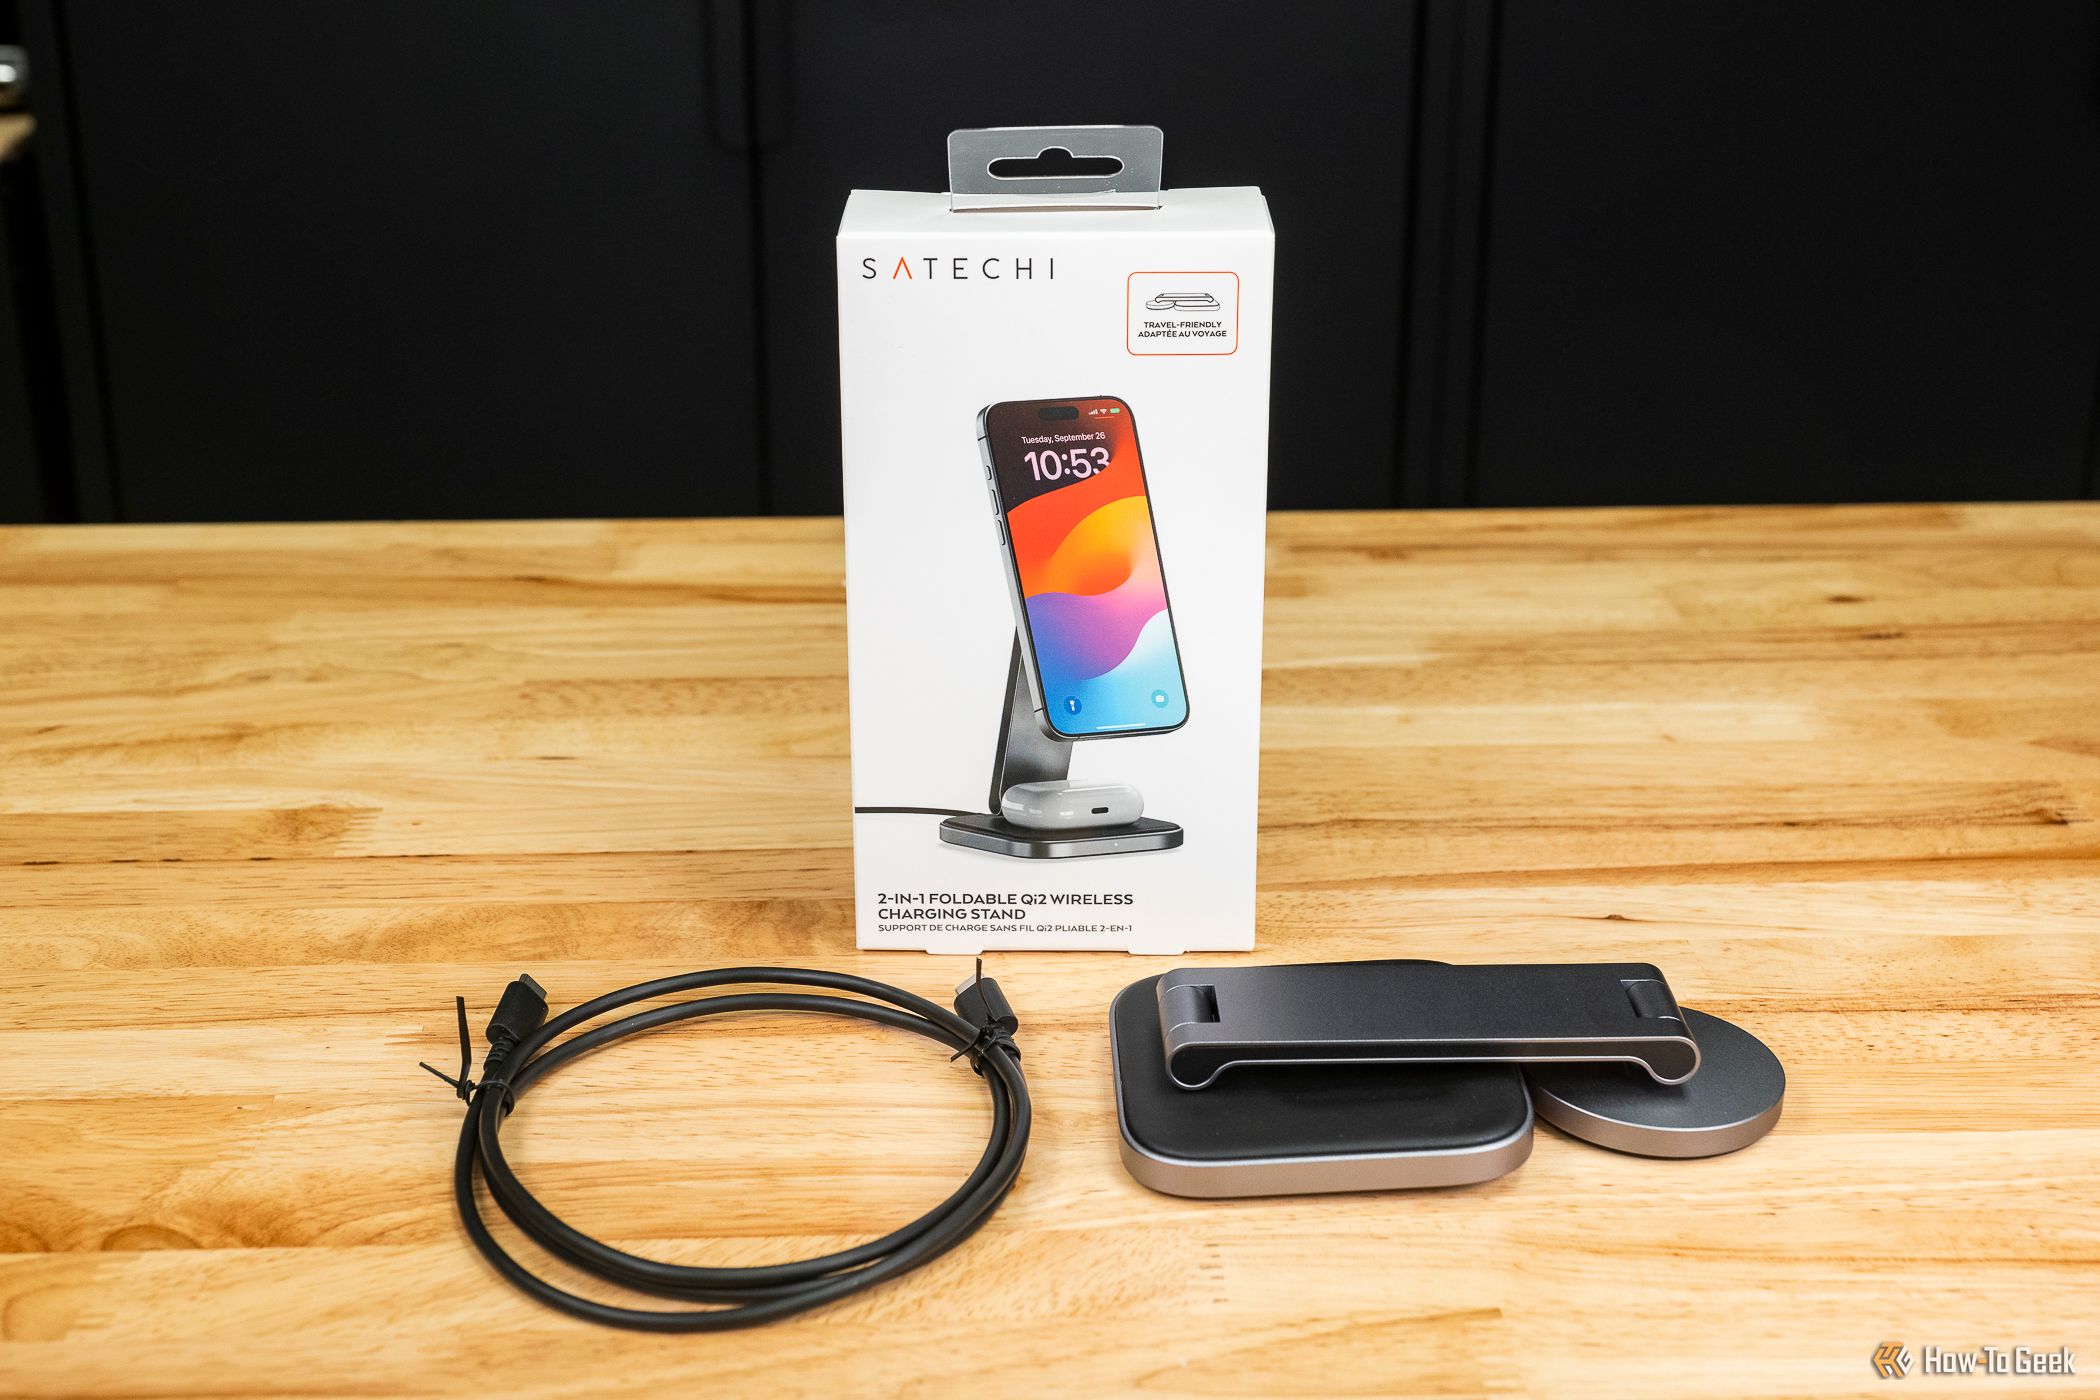 Satechi 2-in-1 Foldable Qi2 Wireless Charging Stand with accessories and box